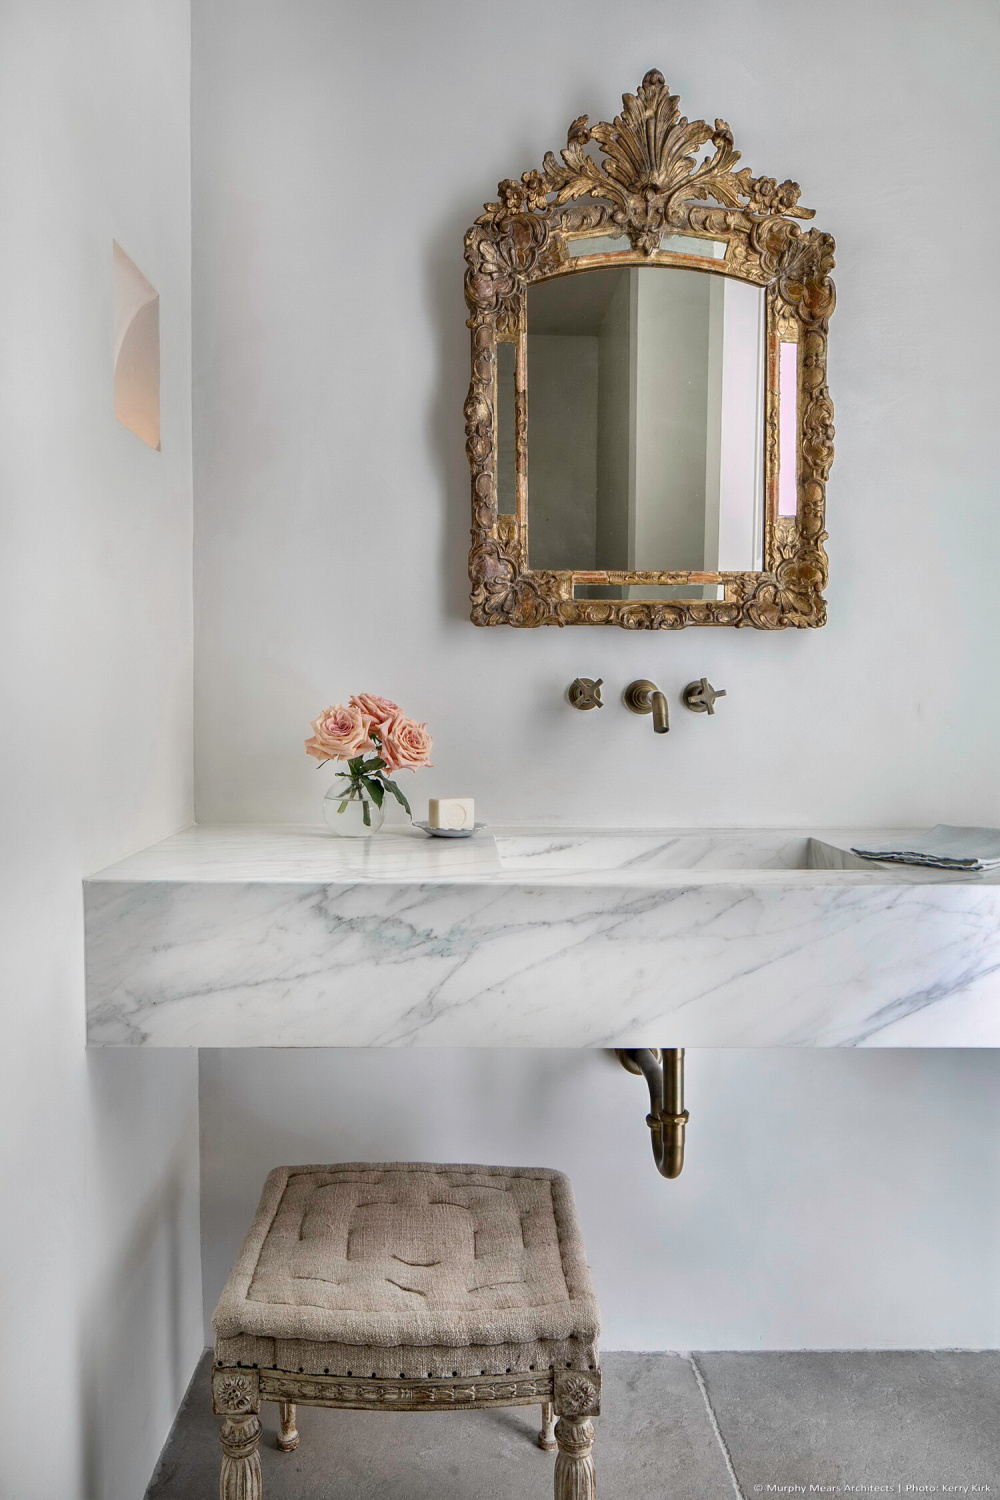 Elegant white marble vanity in a modern French bath with gold finishes, wall mount faucet and design by Jill Egan. #modernfrench #bathrooms